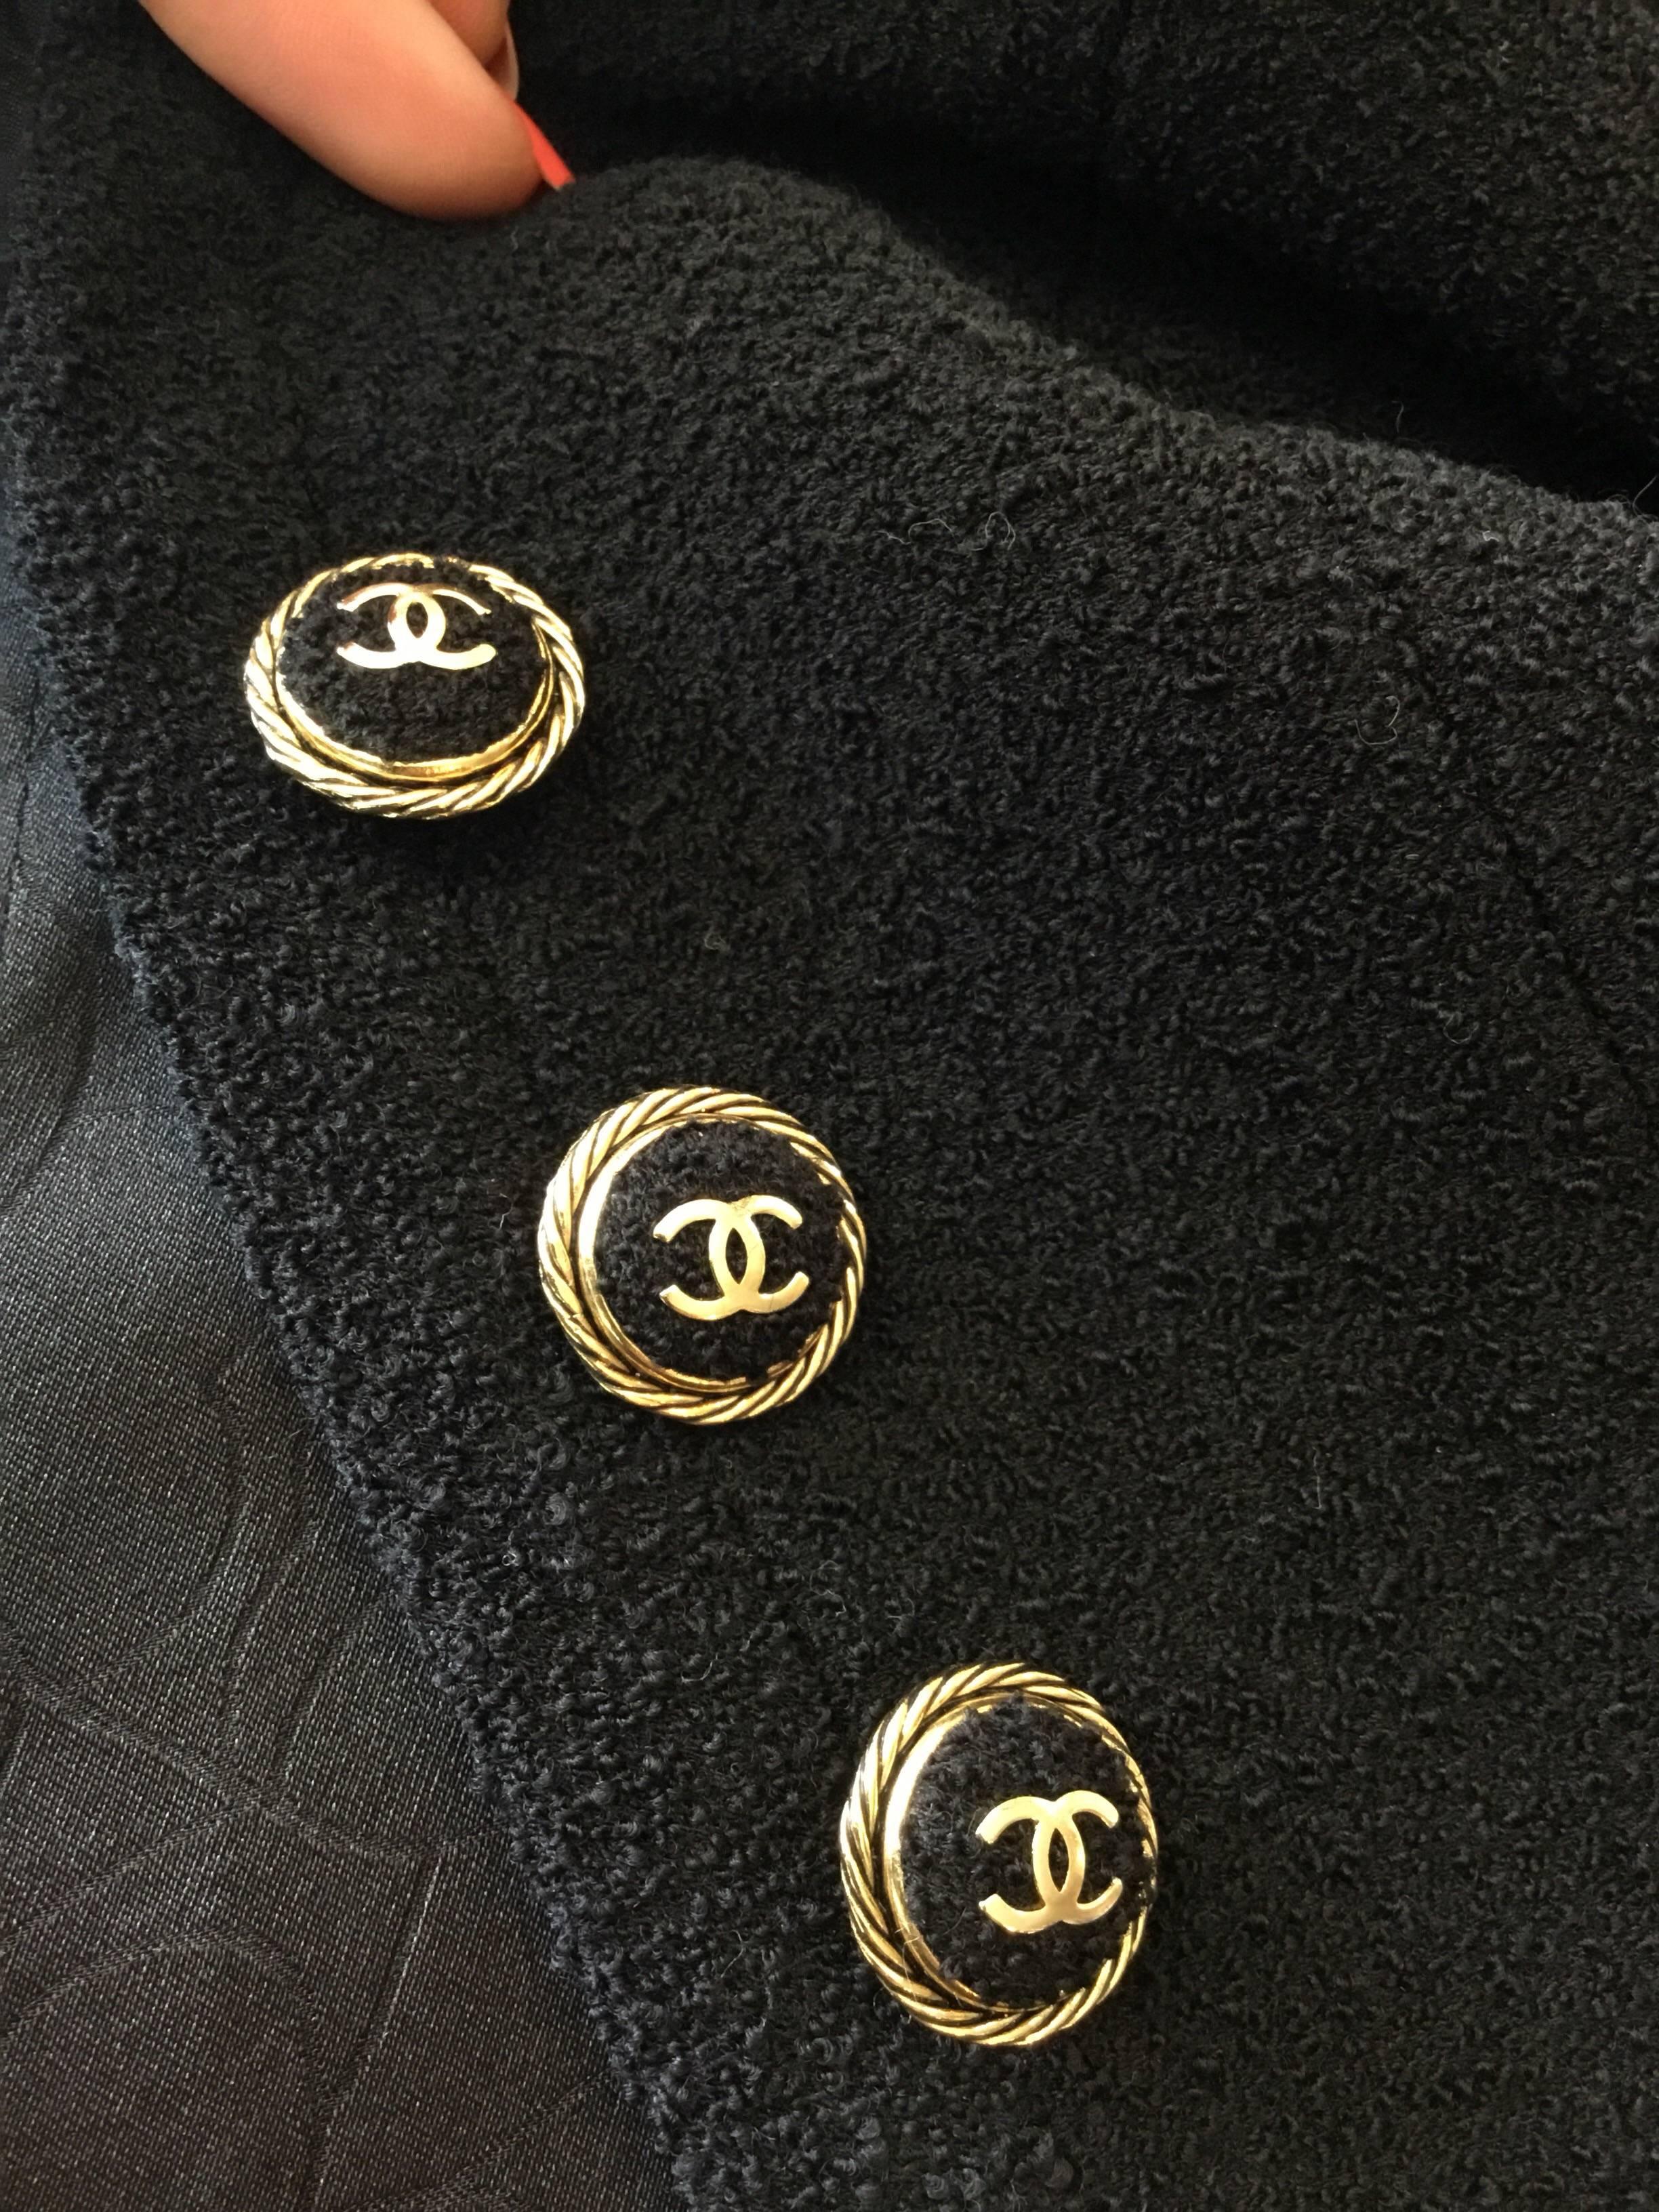 Women's Chanel Gold Button Jacket with three-quarter Sleeves, 2007 